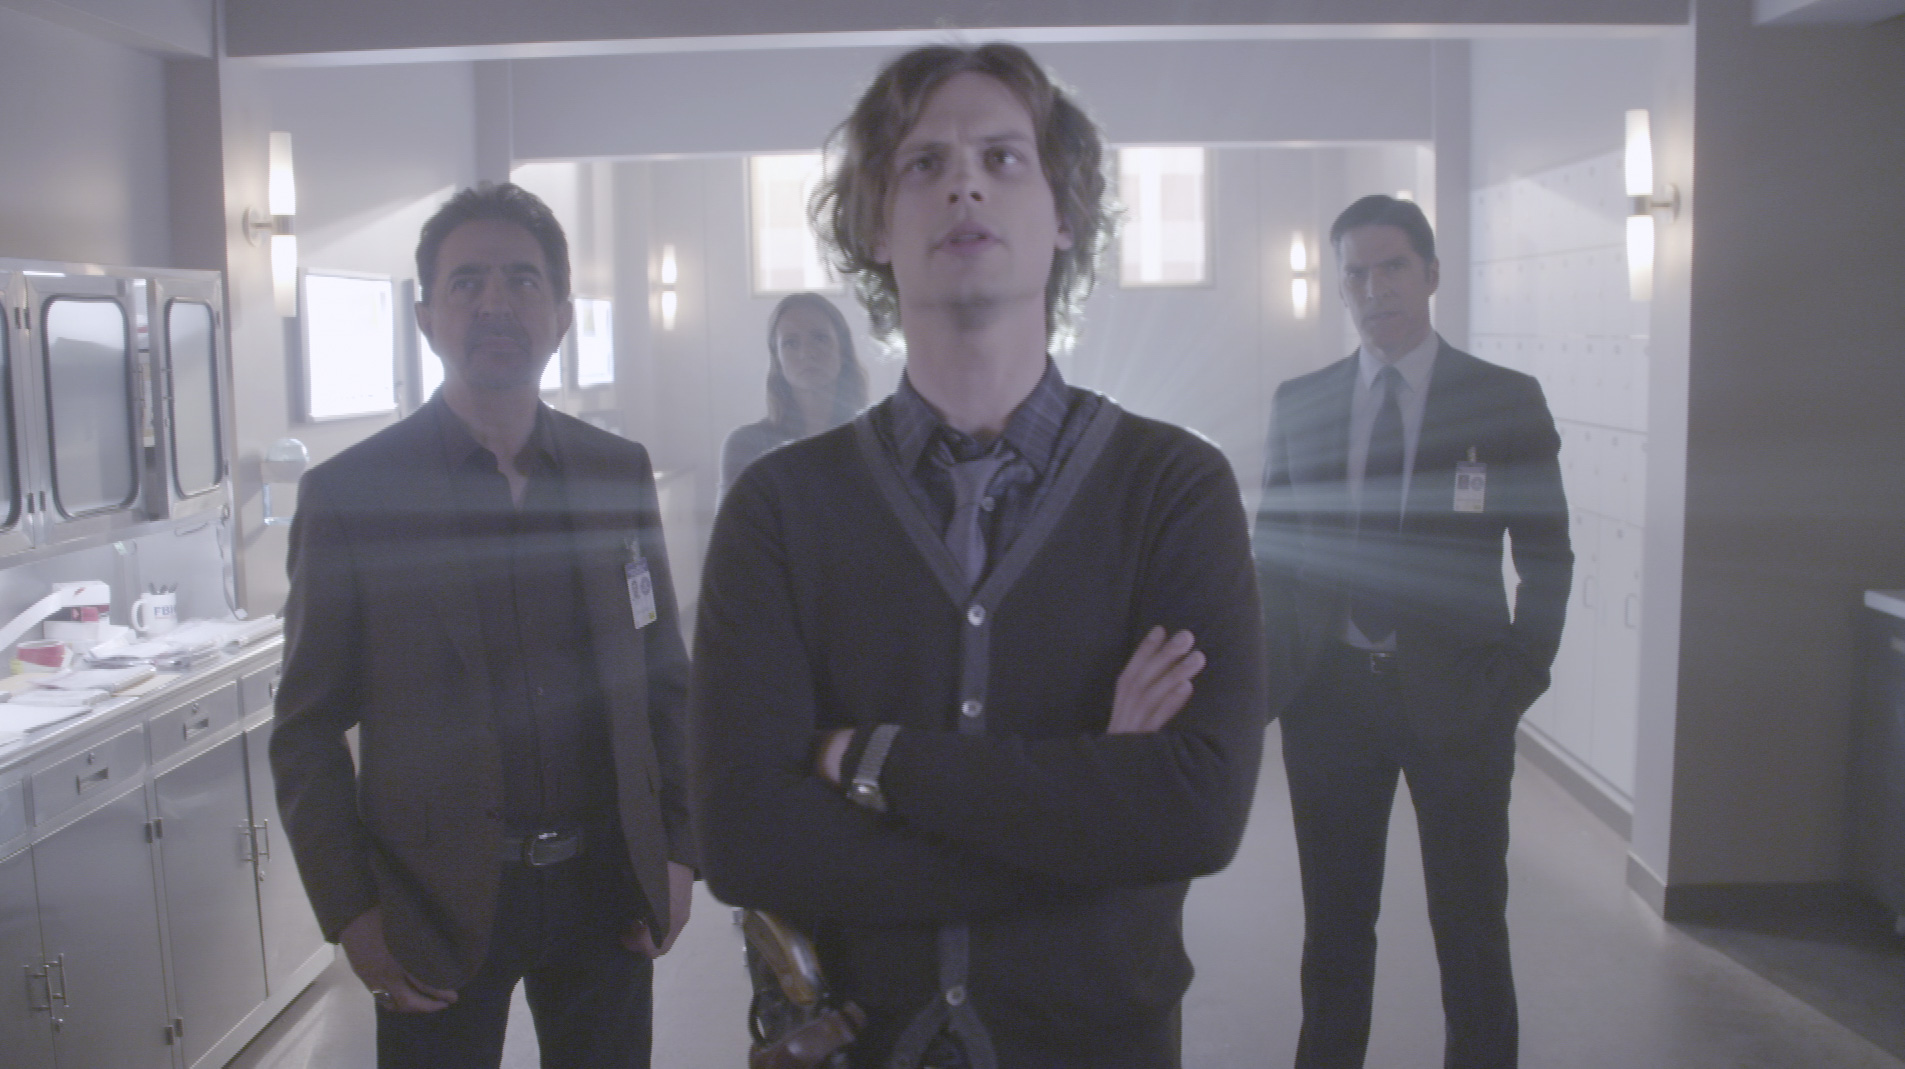 Criminal Minds Season 11 finale airs on Wednesday, May 4 at 9/8c.